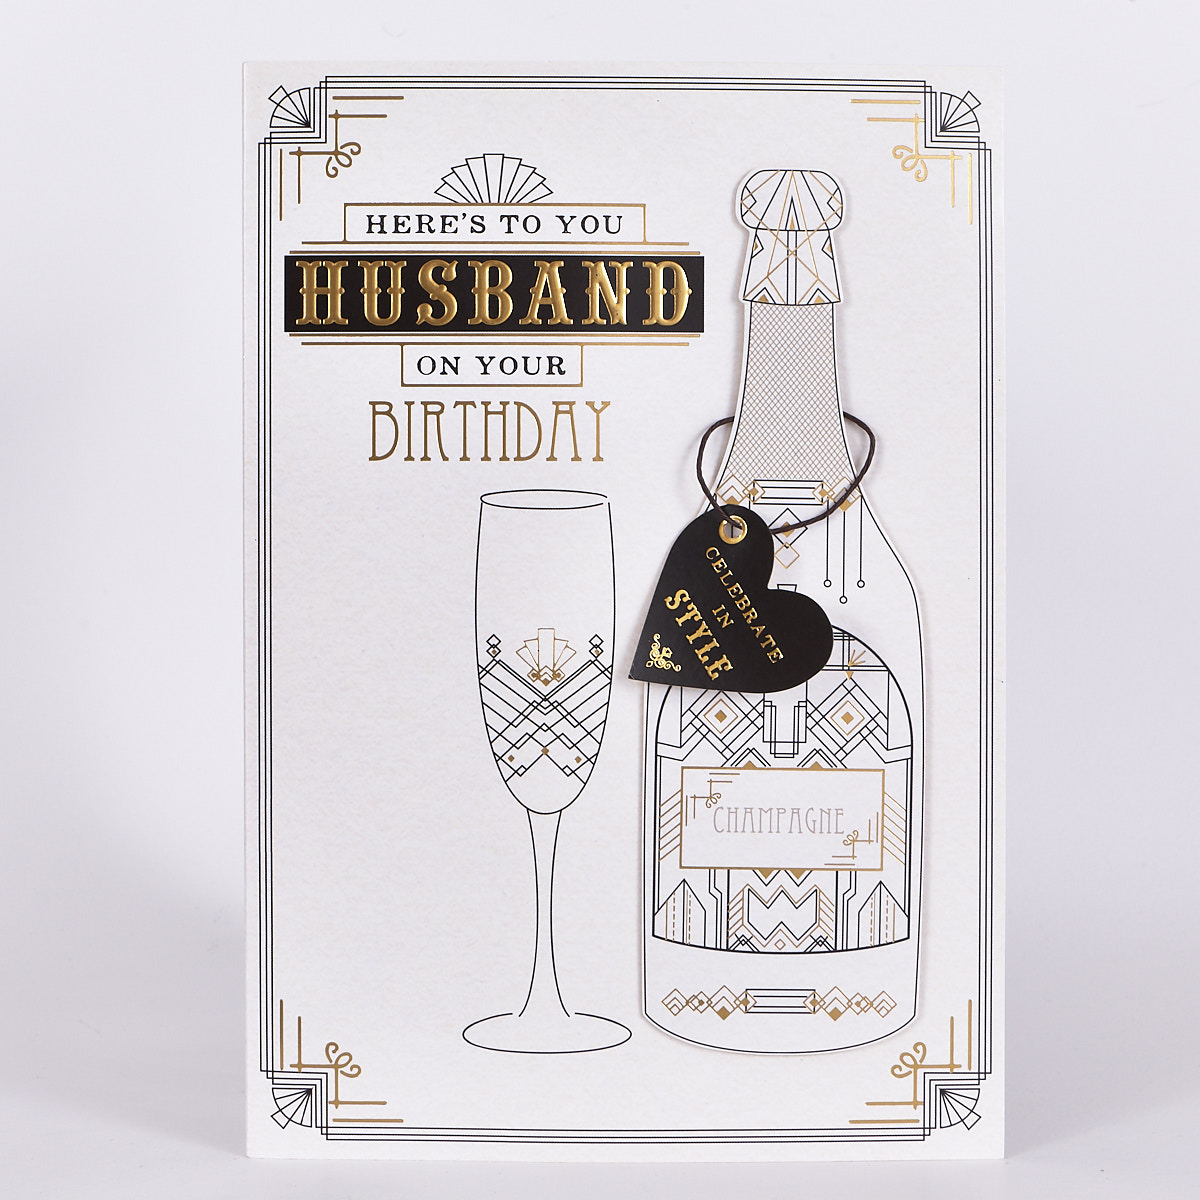 Signature Collection Birthday Card - Husband Champagne